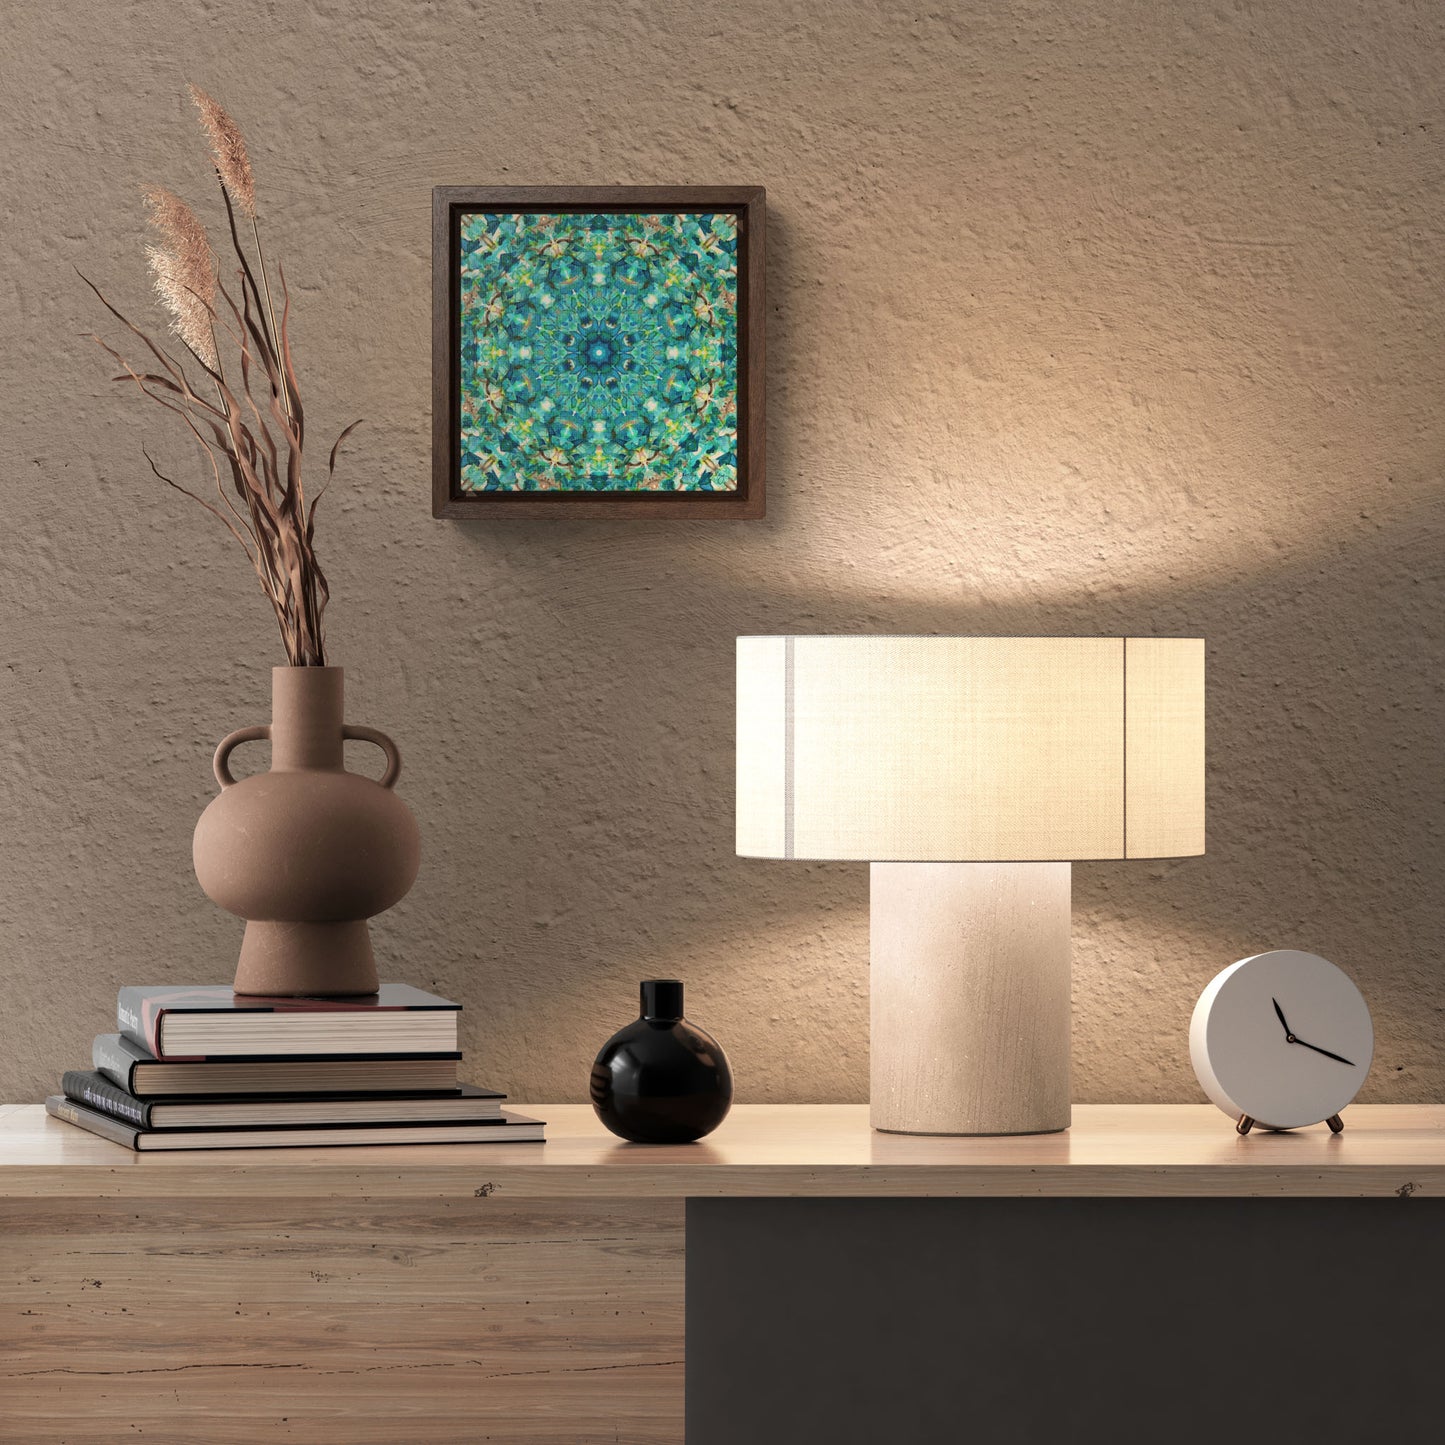 Stretched canvas featuring a teal abstract pattern in a brown float frame hanging over a desk with a vase and lamp